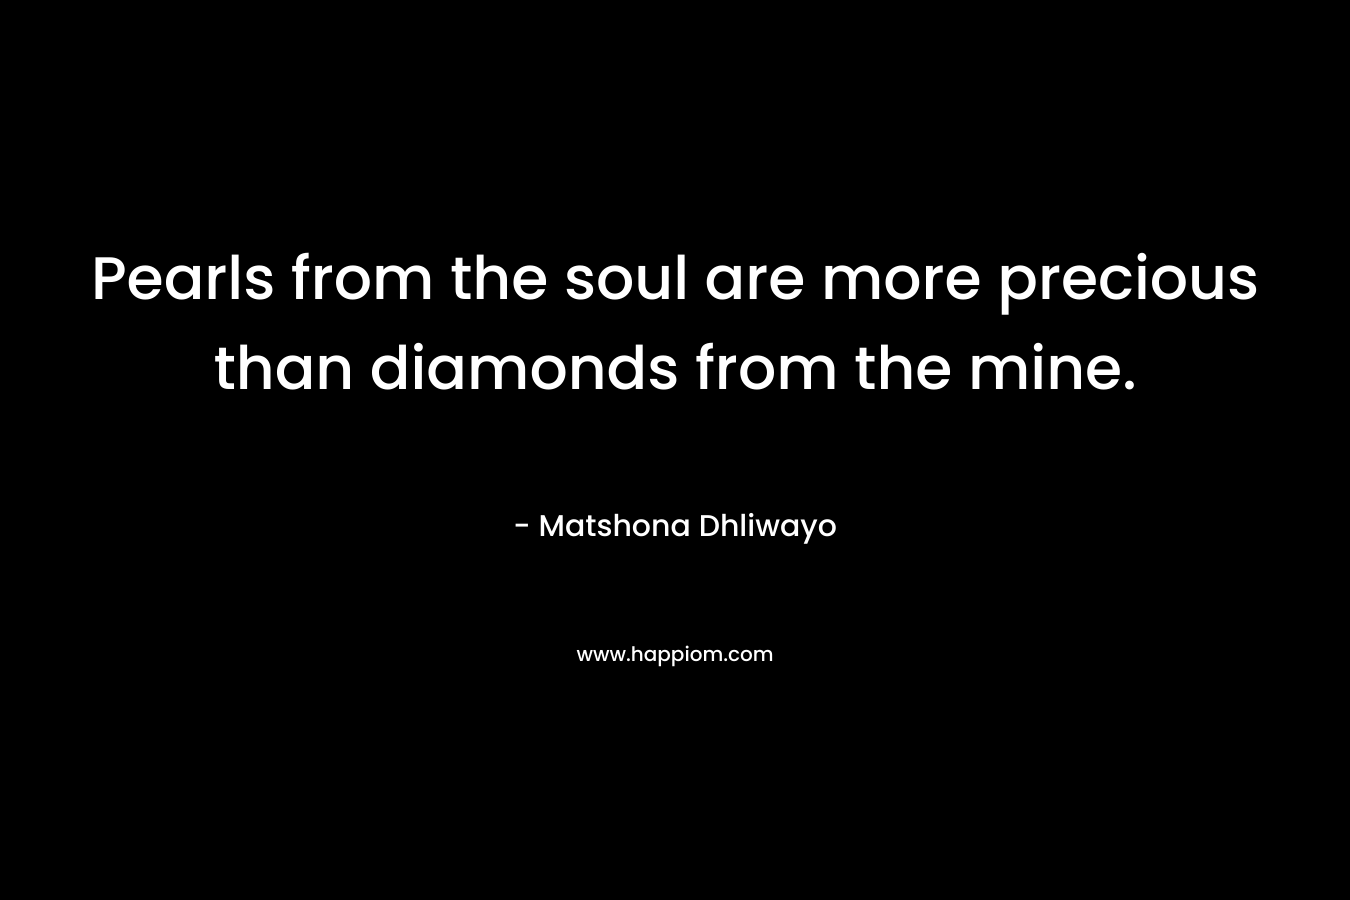 Pearls from the soul are more precious than diamonds from the mine. – Matshona Dhliwayo